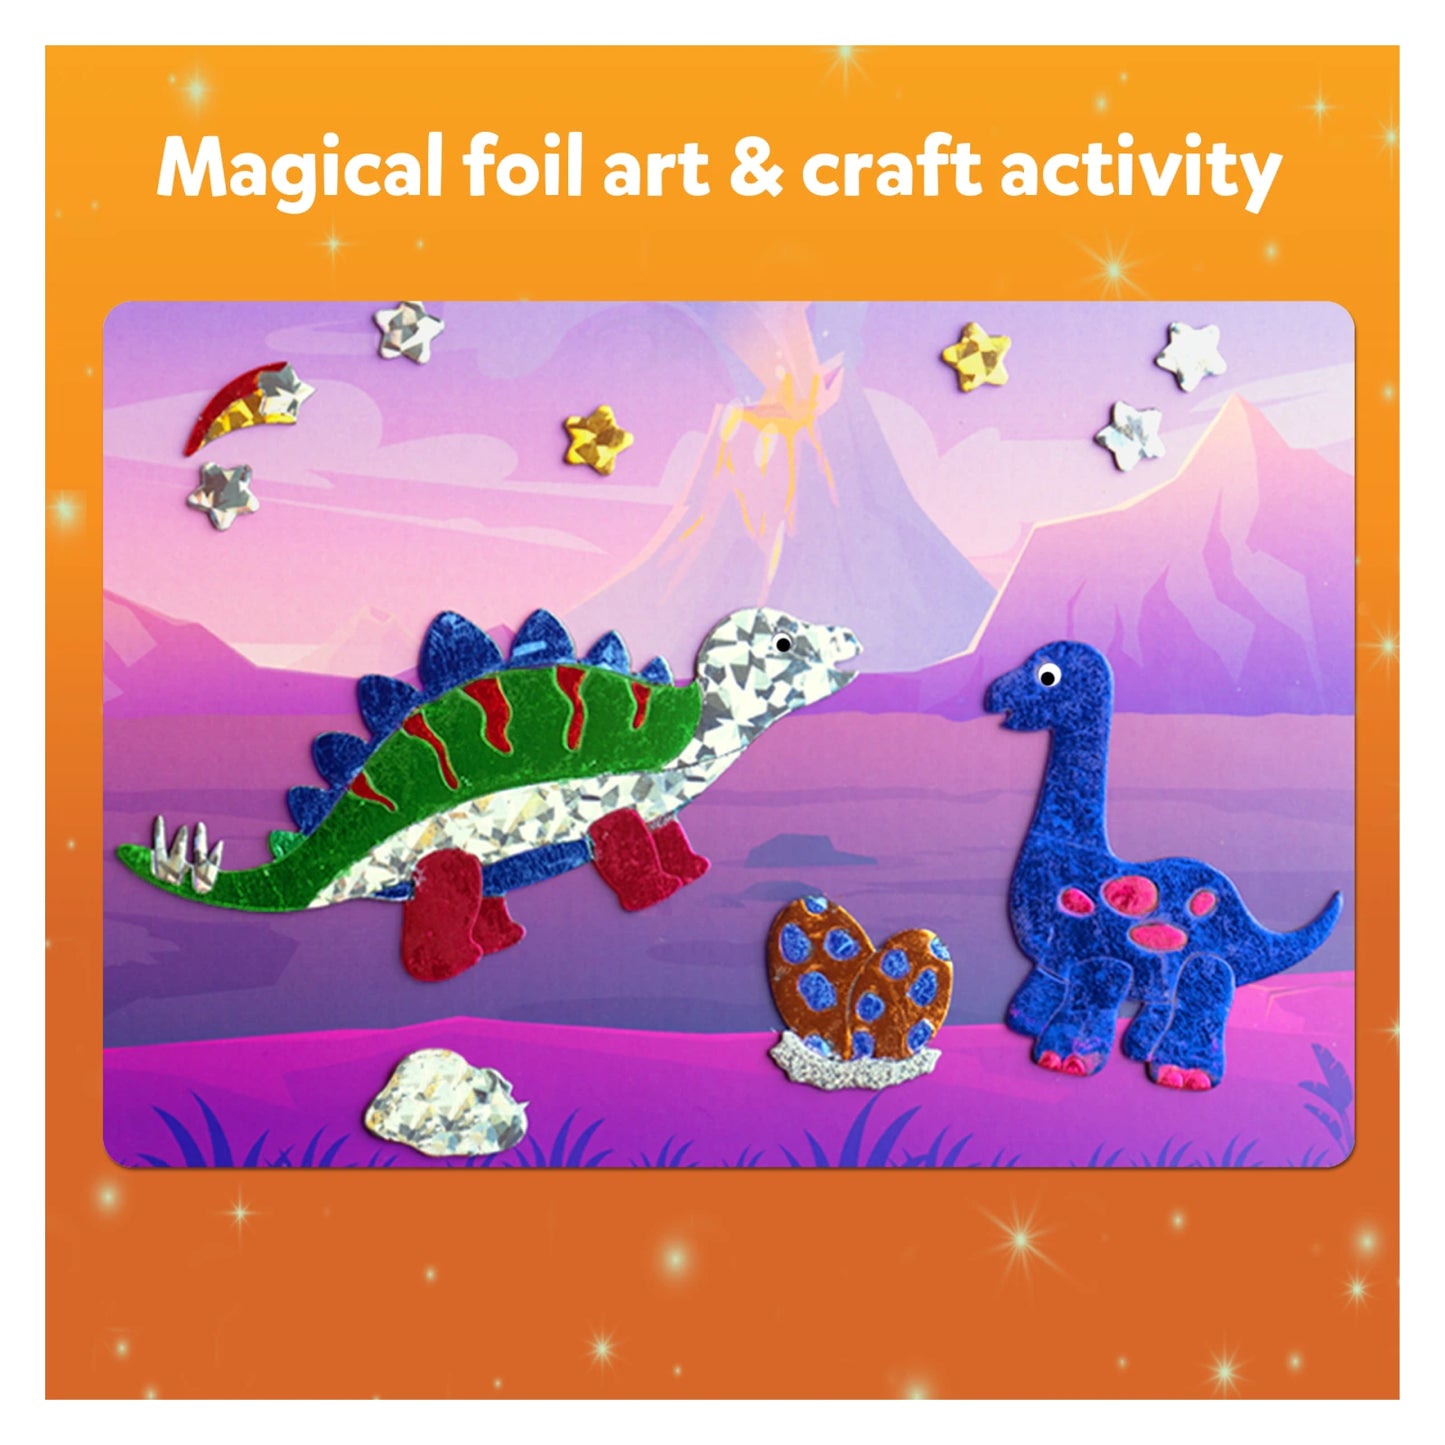 Foil Fun: World Of Dinosaurs |  No Mess Art Kit (ages 4-9)